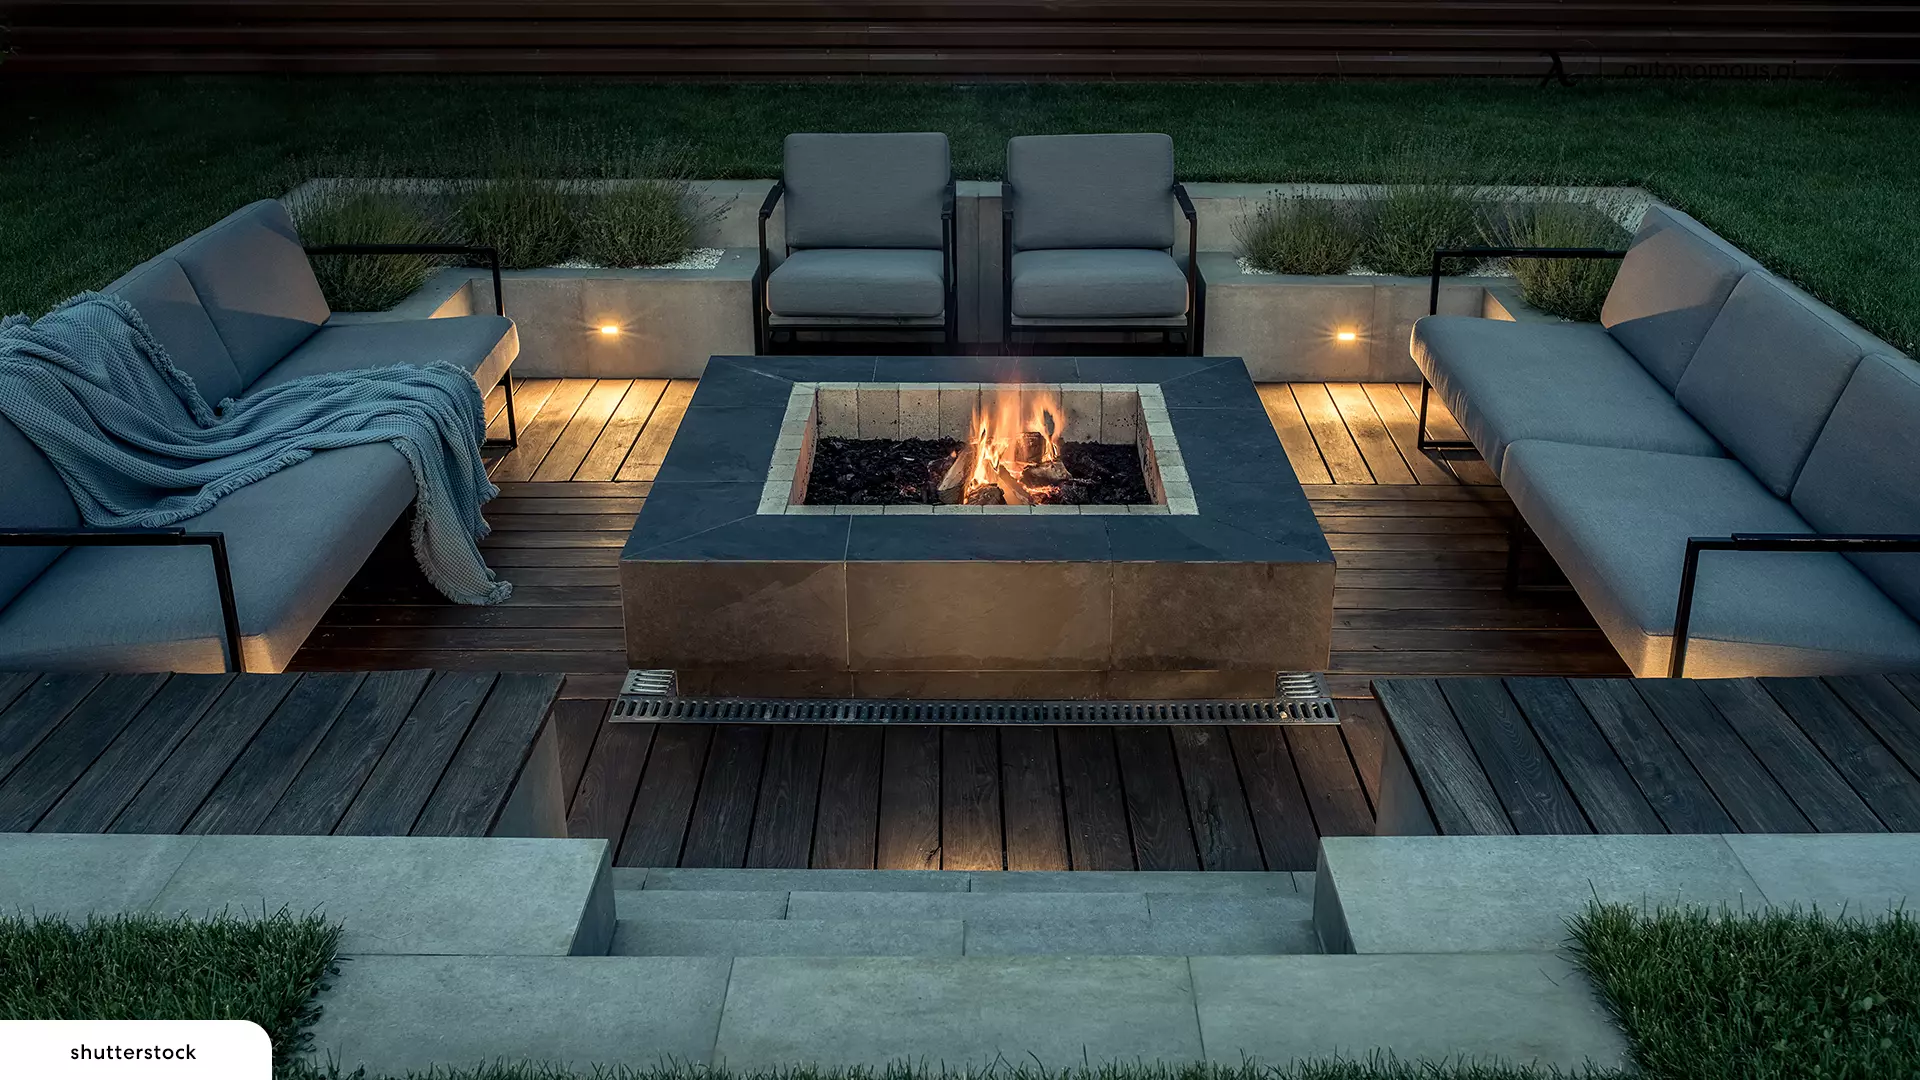 Fire Pit - outdoor living space ideas